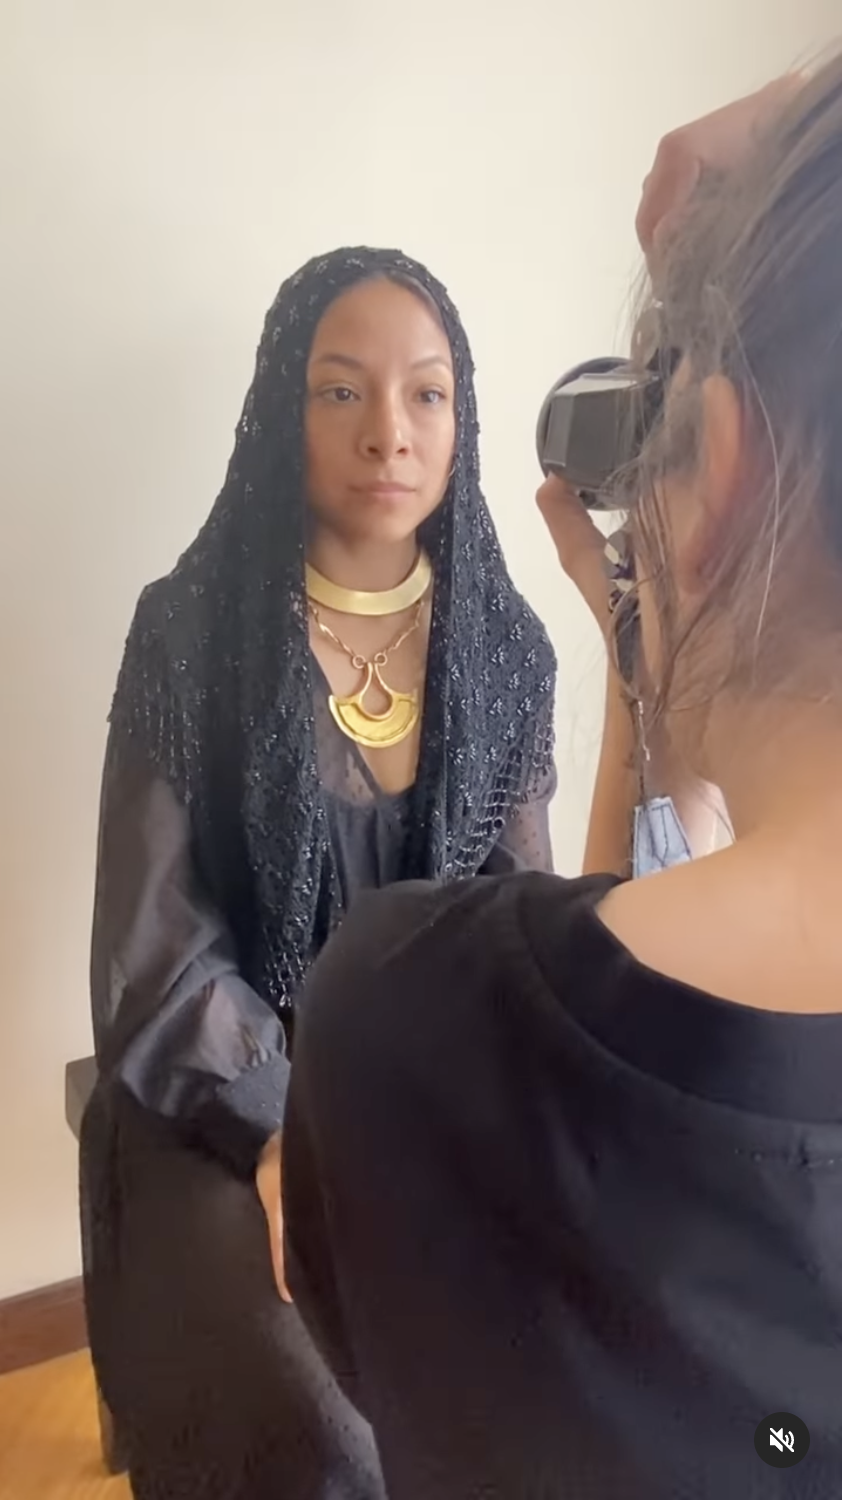 Screenshot of the One-Minute Workshop based on the work of Foam Talent 2024-2025 Marisol Mendez. Photo shows the model wearing a black veil and part of the photographer, taking her portrait.